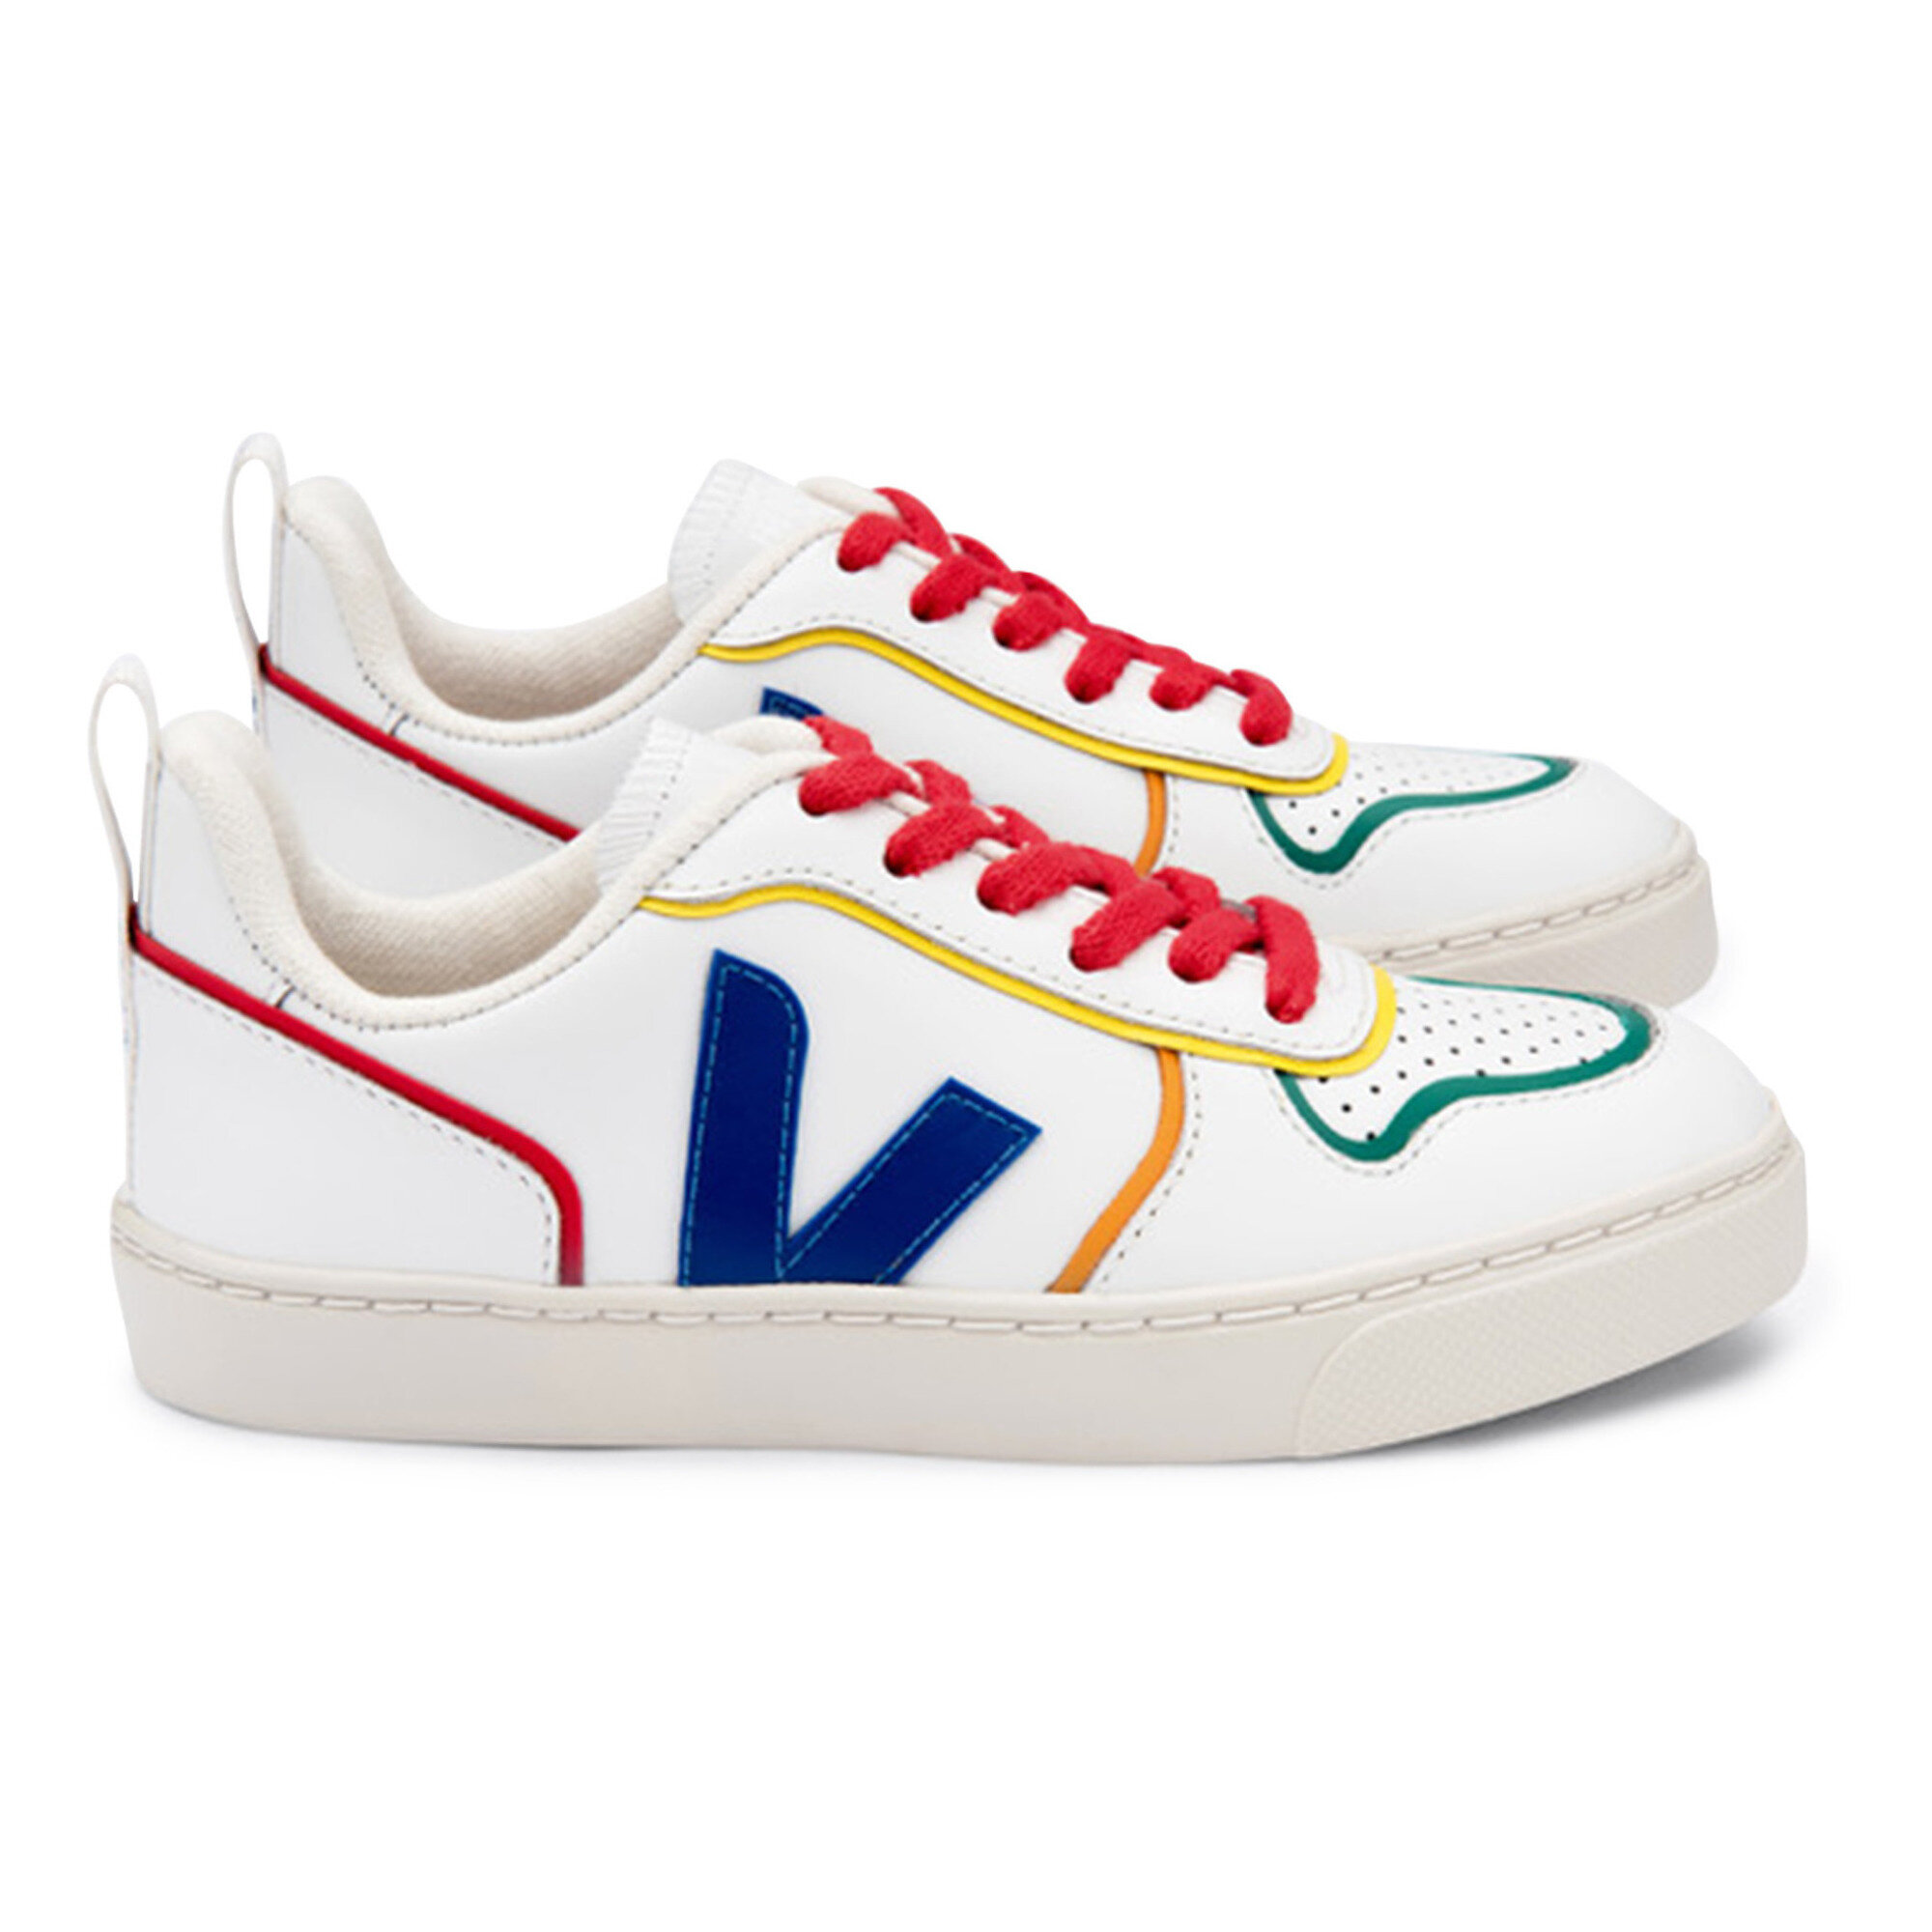 Gucci Launches Vegan Sneakers: Here's Everything You Need to Know About Its  New Leather